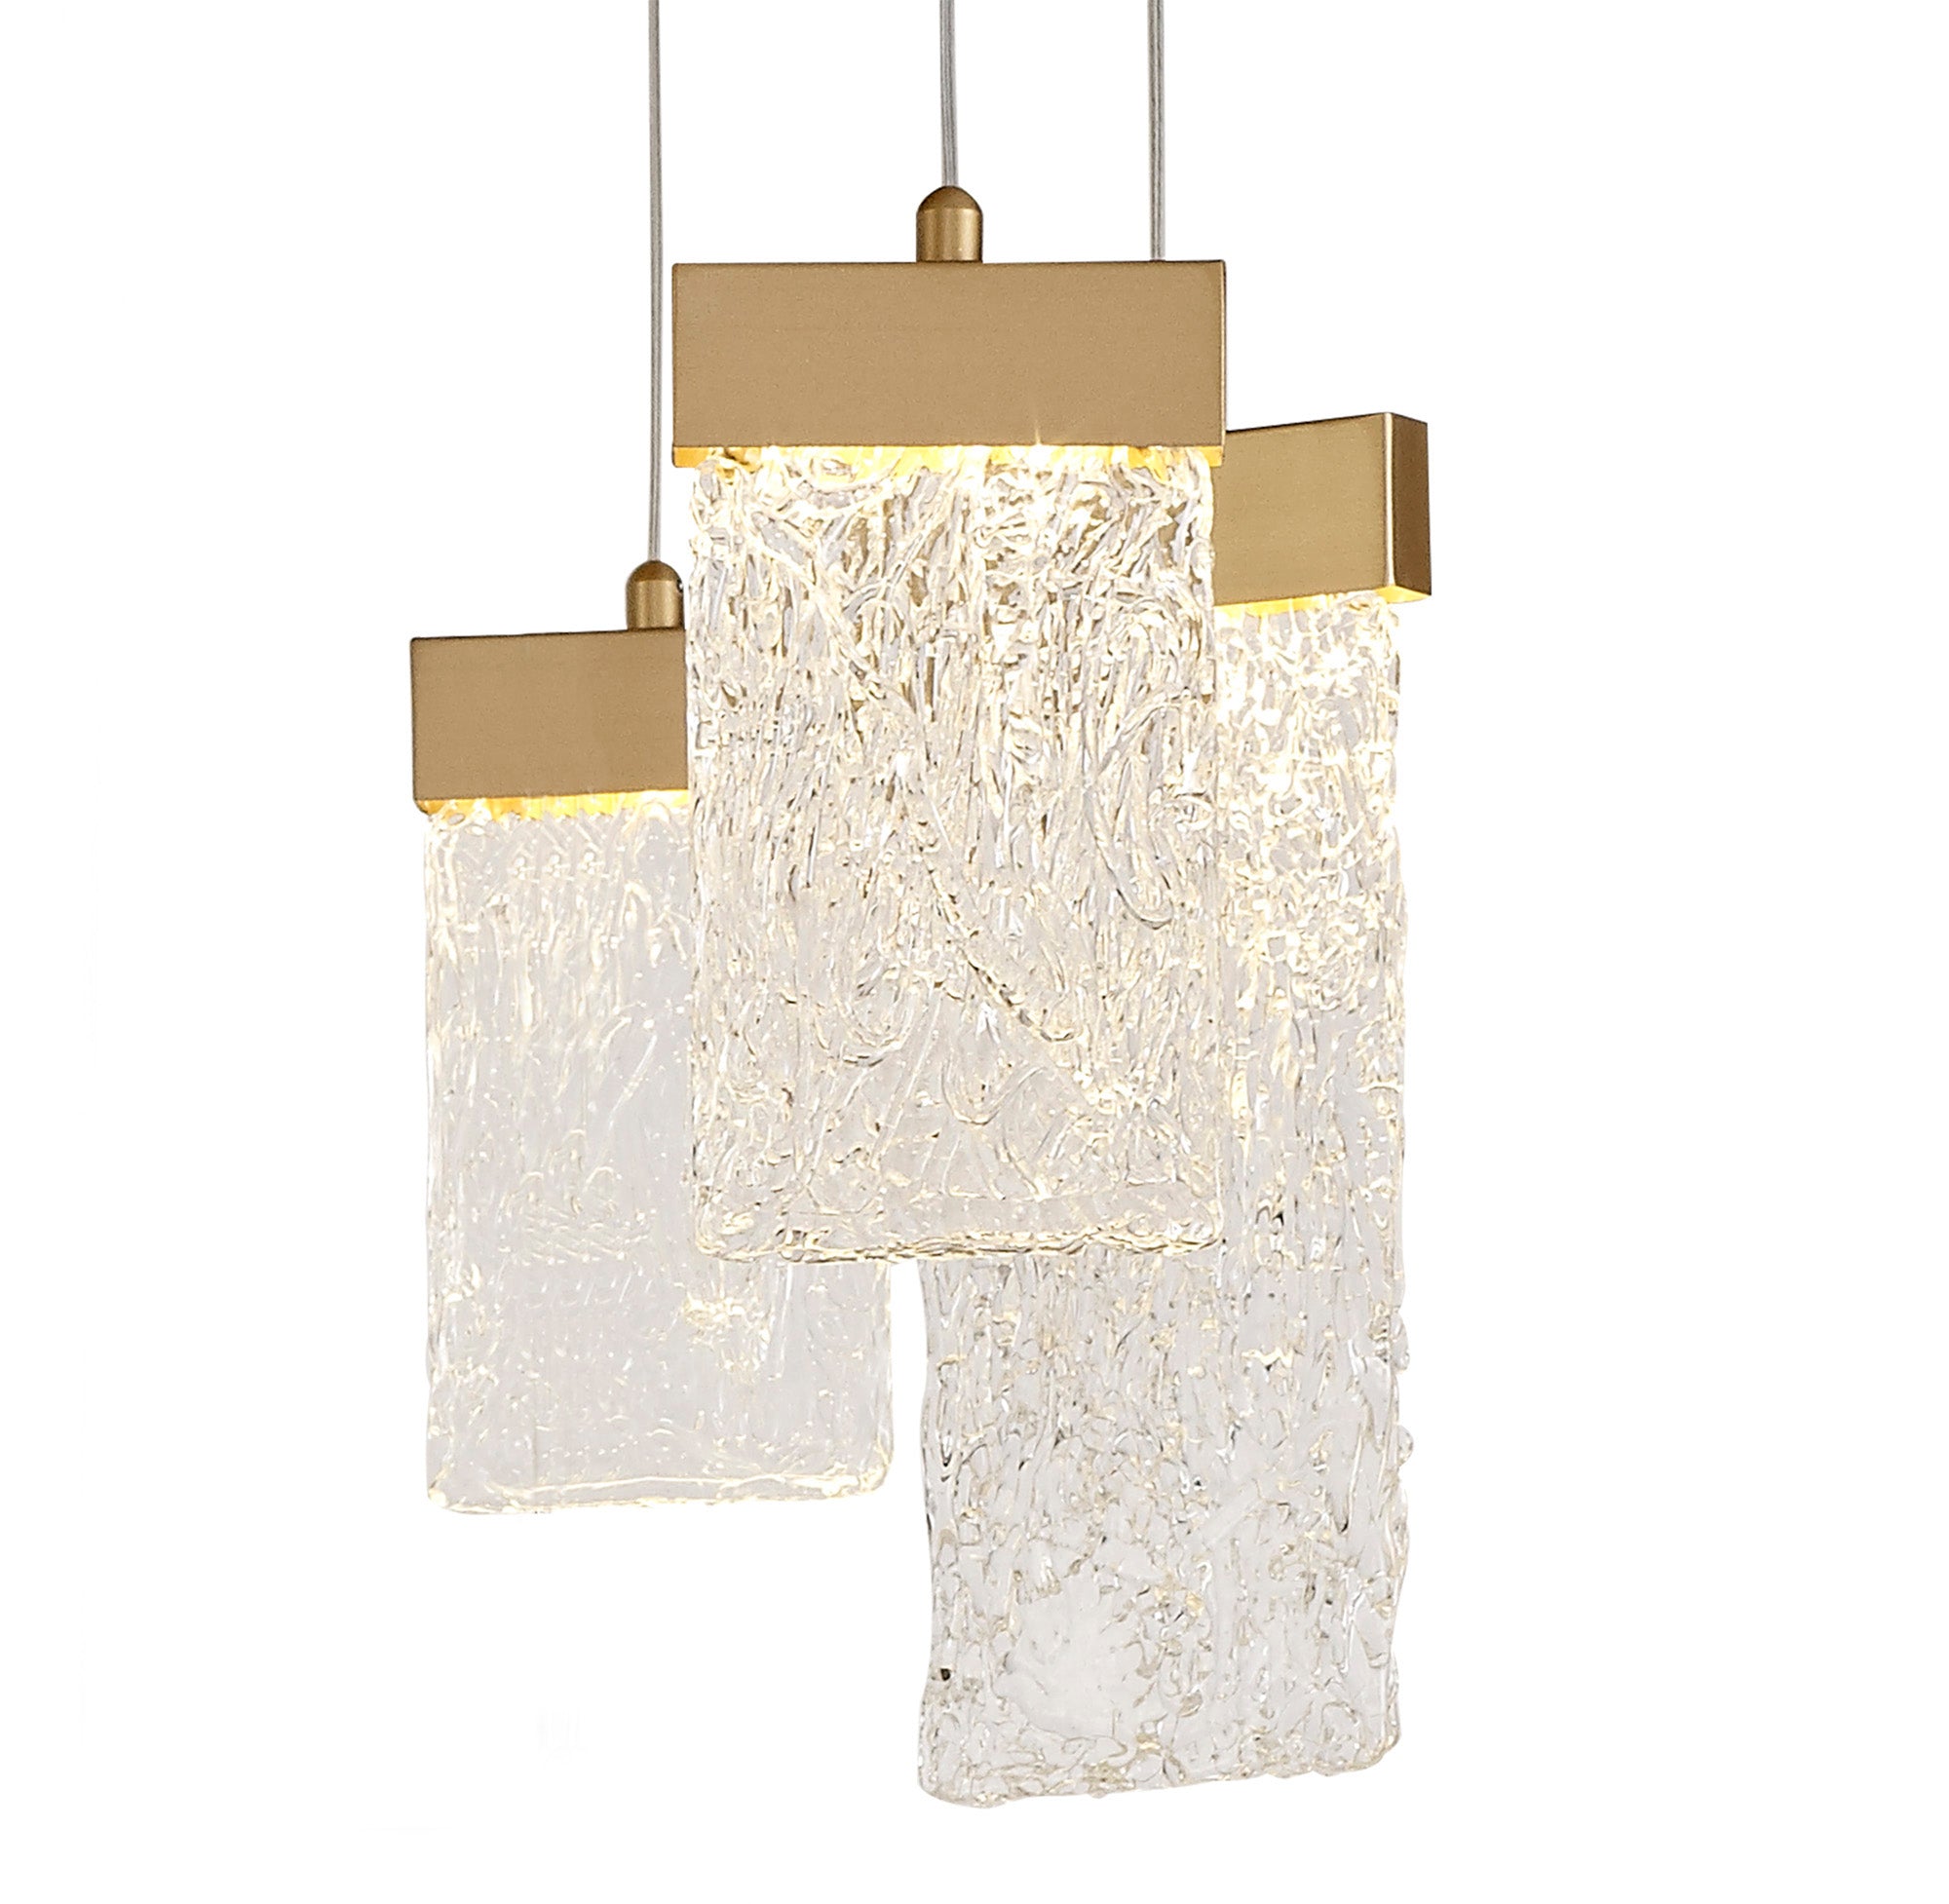 Barish Pendant Round 5 metre drop, 21 x 4.5W LED, 3000K, 3360lm, Painted Brushed Gold, 3yrs Warranty Item Weight: 34.2kg